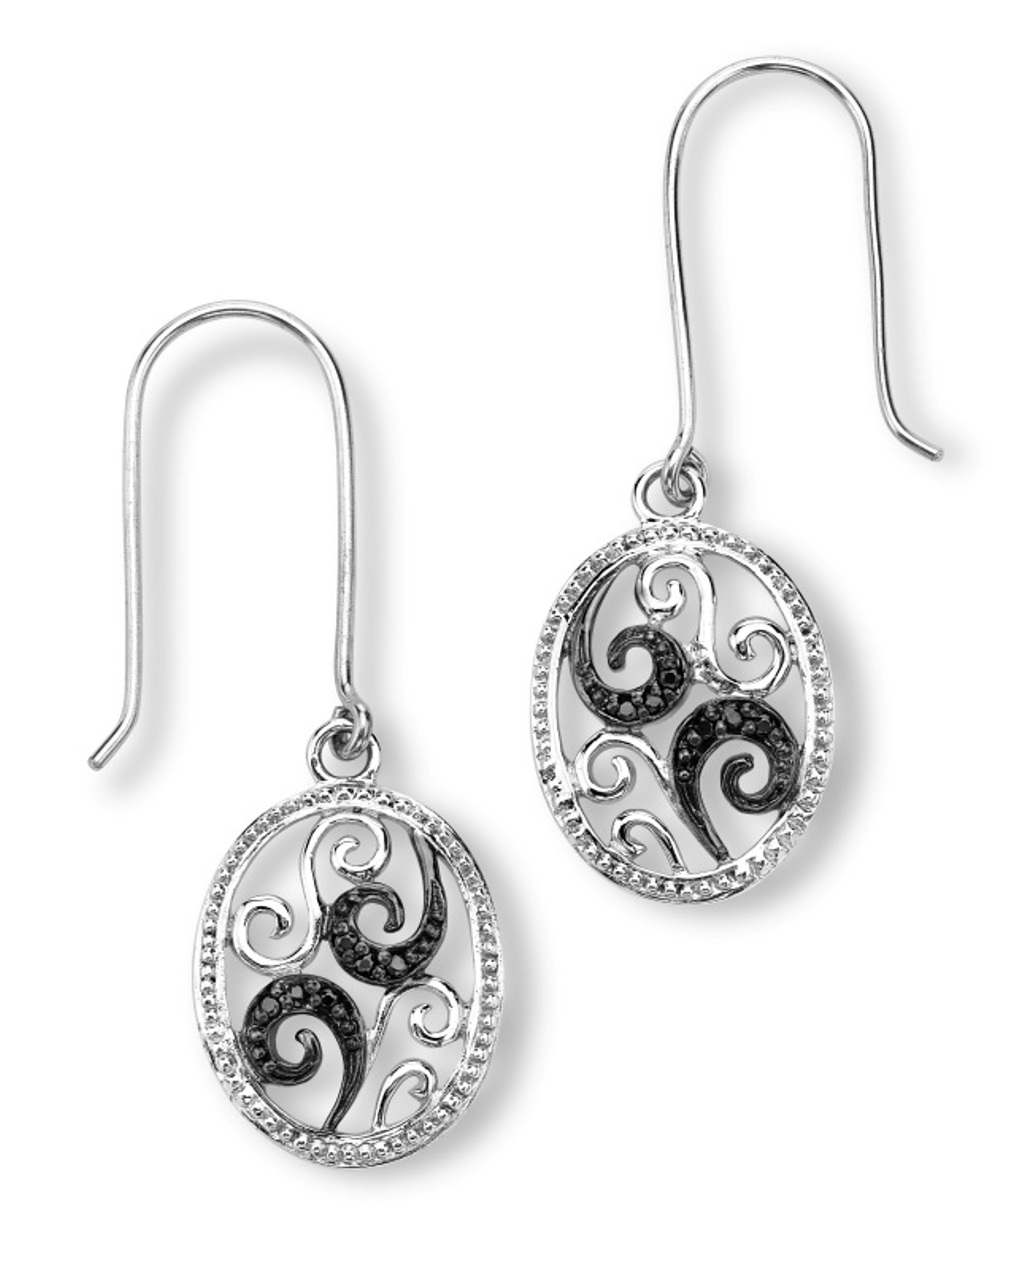 Black and White CZ Swirl Oval Drop Earrings, Rhodium Plated Sterling Silver